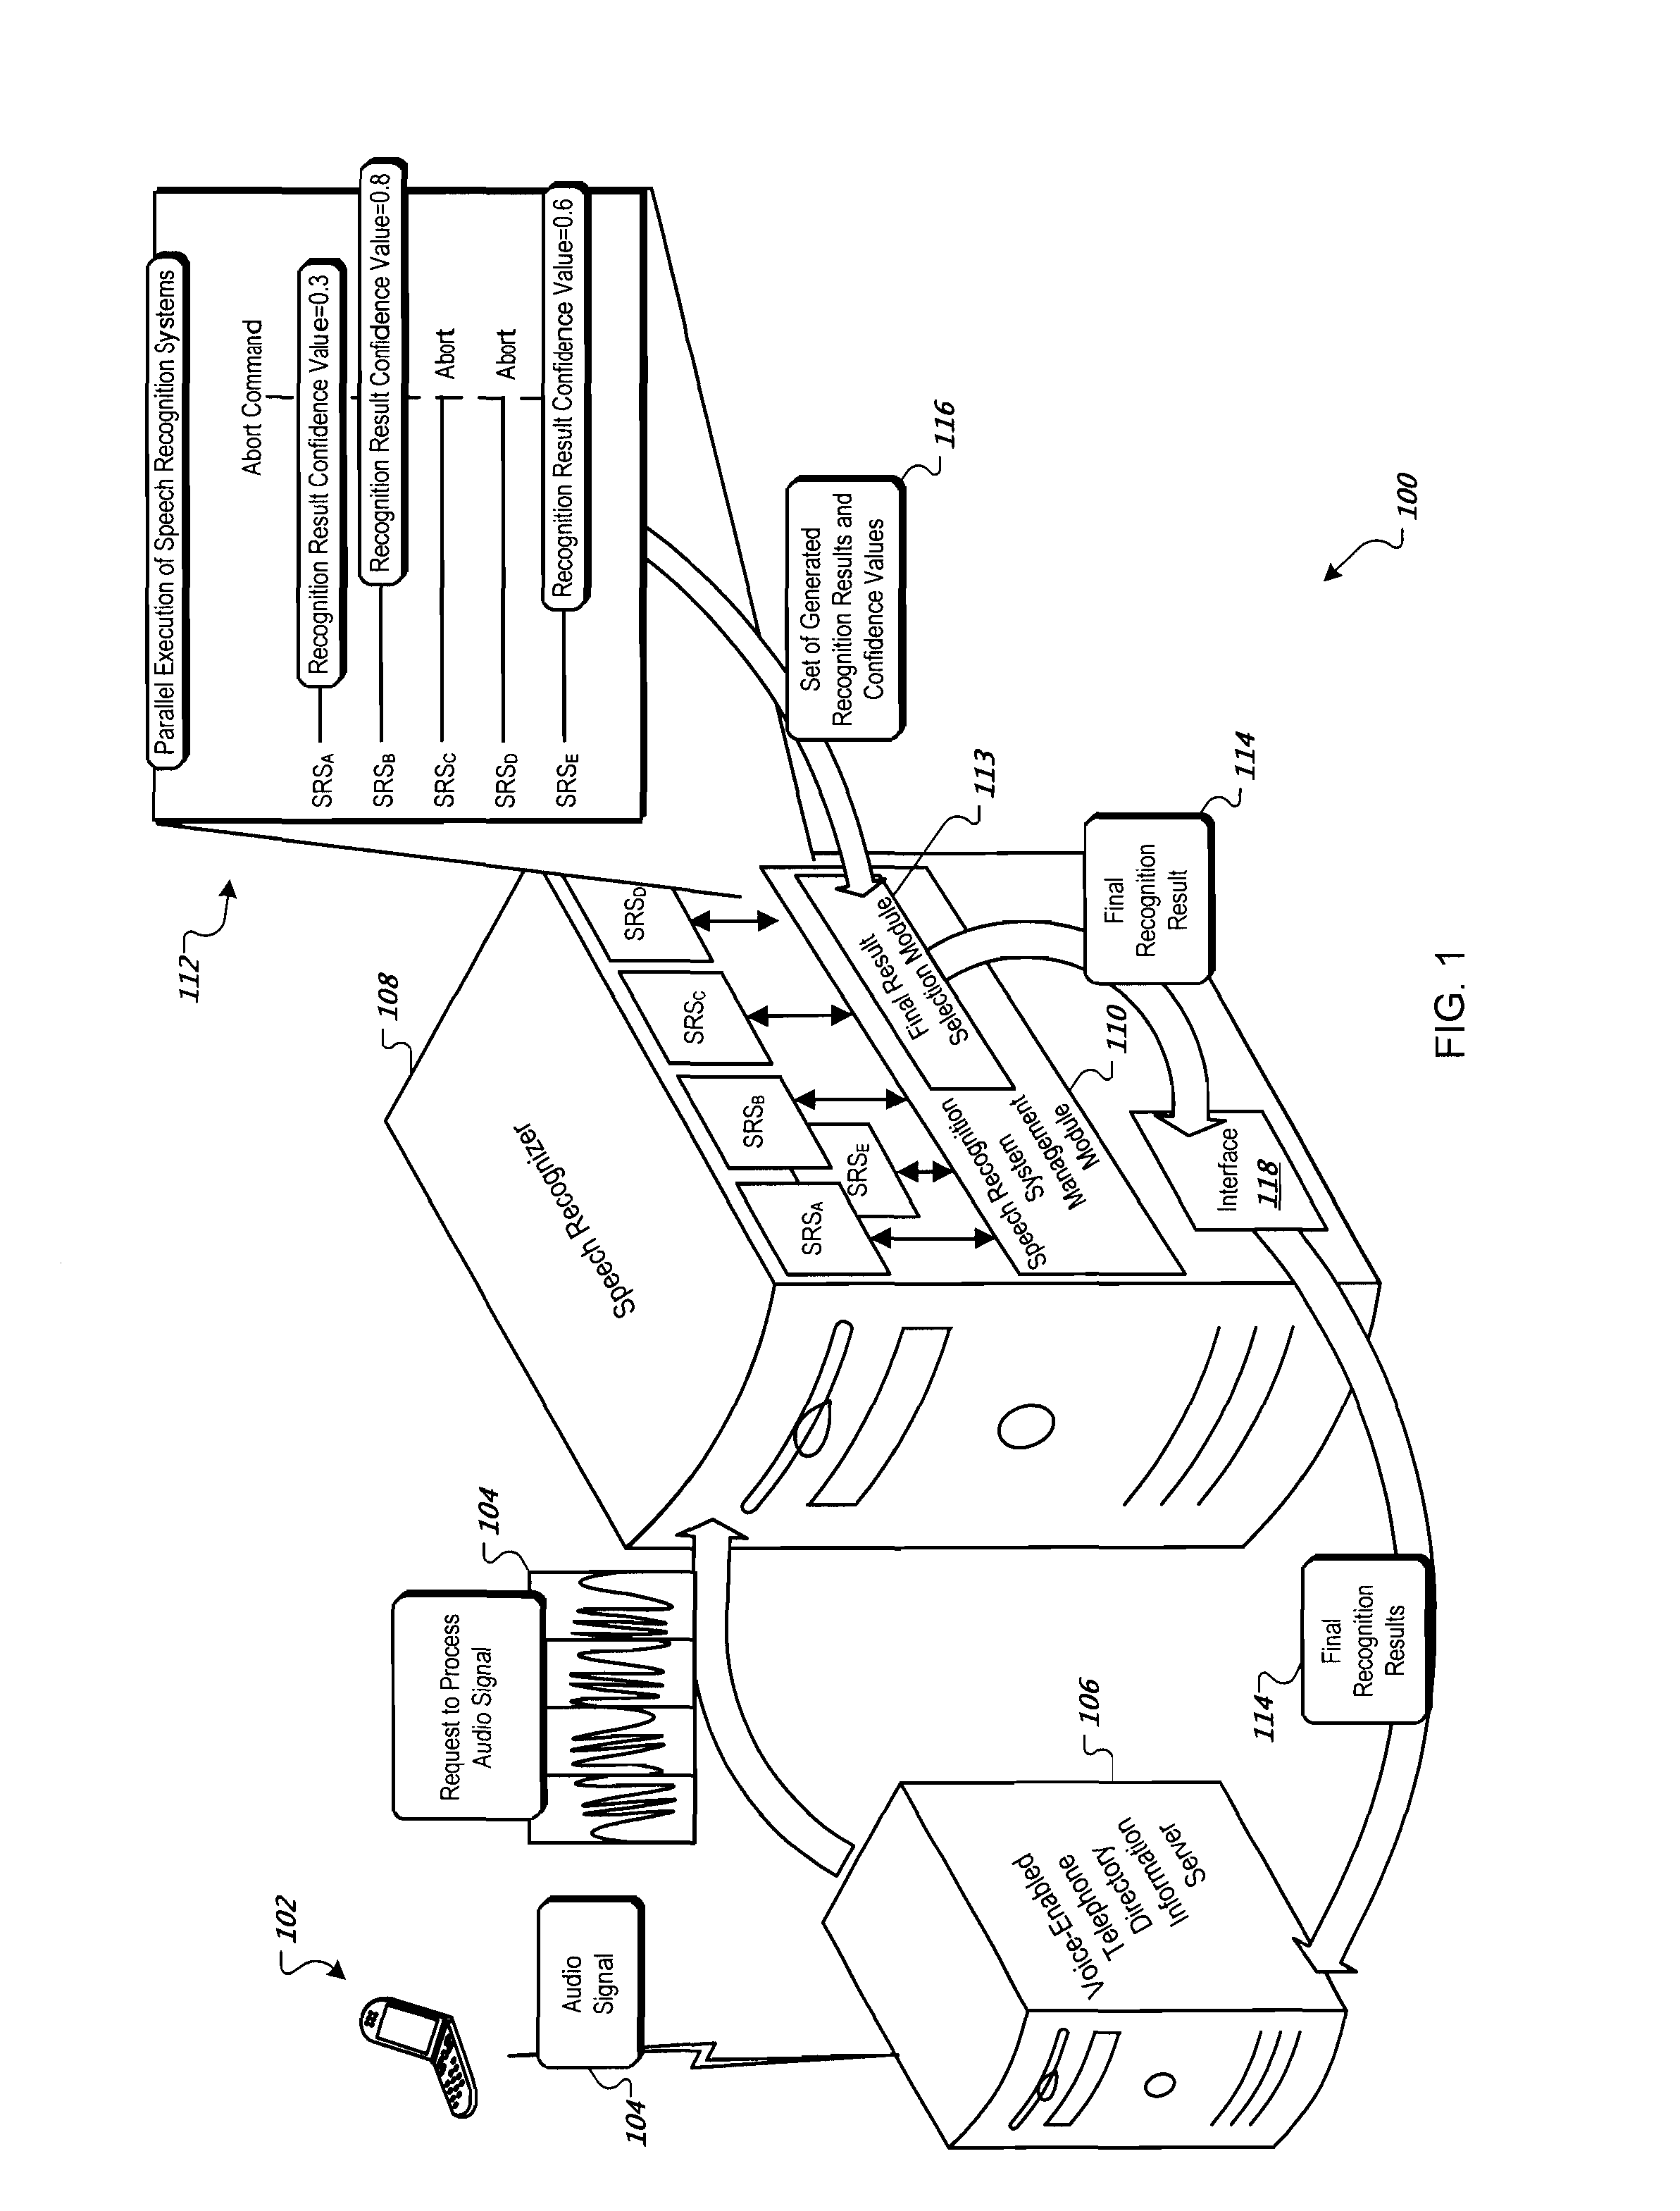 Speech Recognition with Parallel Recognition Tasks